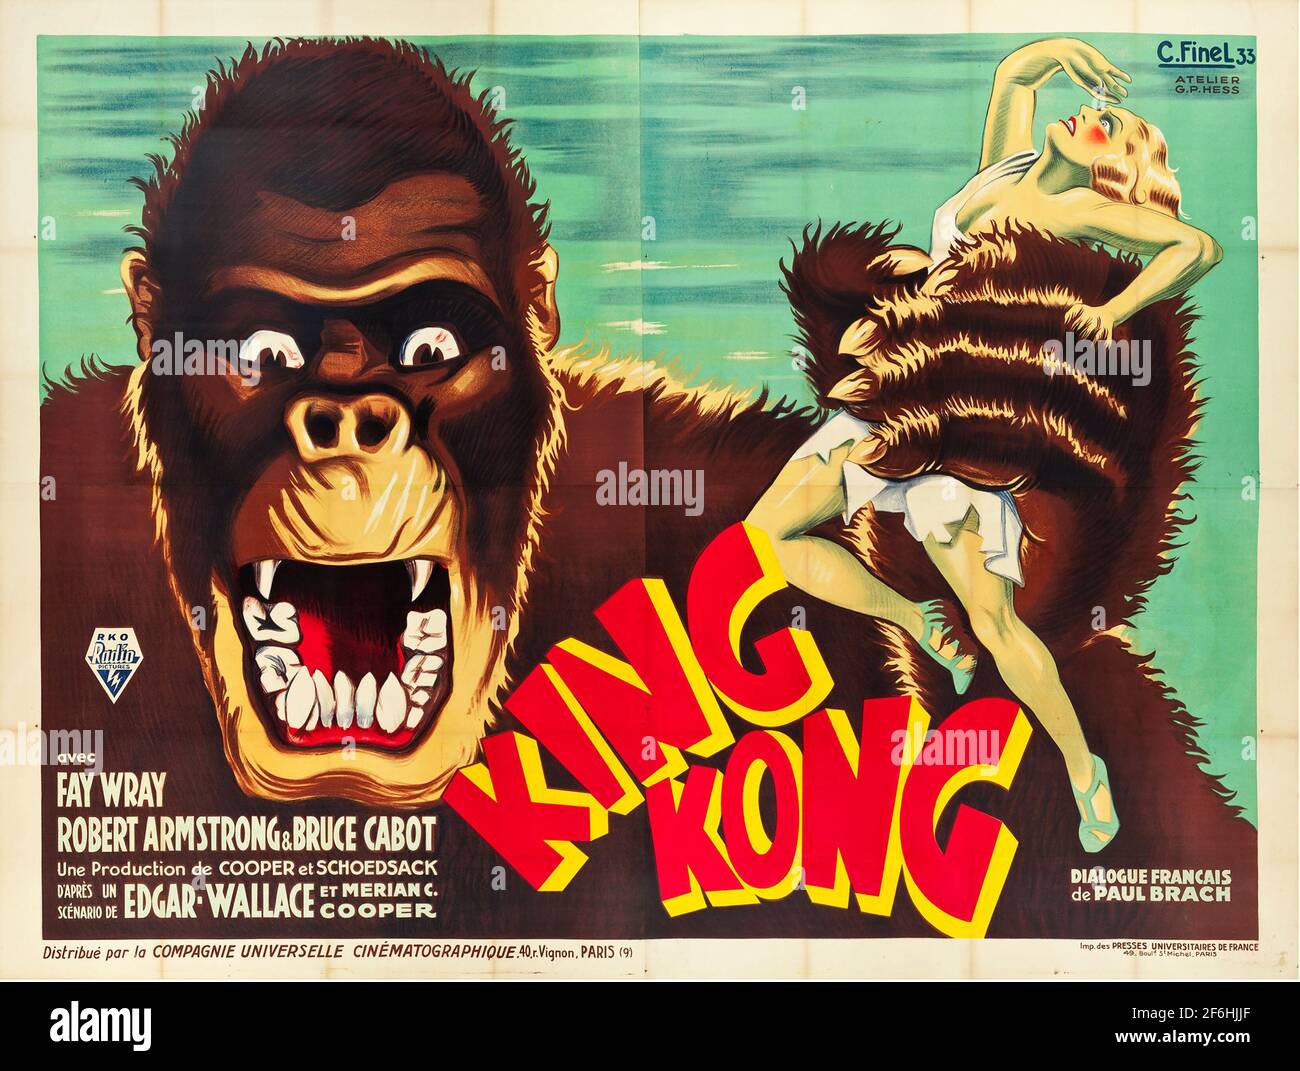 King Kong, movie poster 1933. Featuring Fay Wray, Bruce Cabot, Robert Armstrong, Frank Reicher. Adventure / Fantasy / Action / Romance. Stock Photo